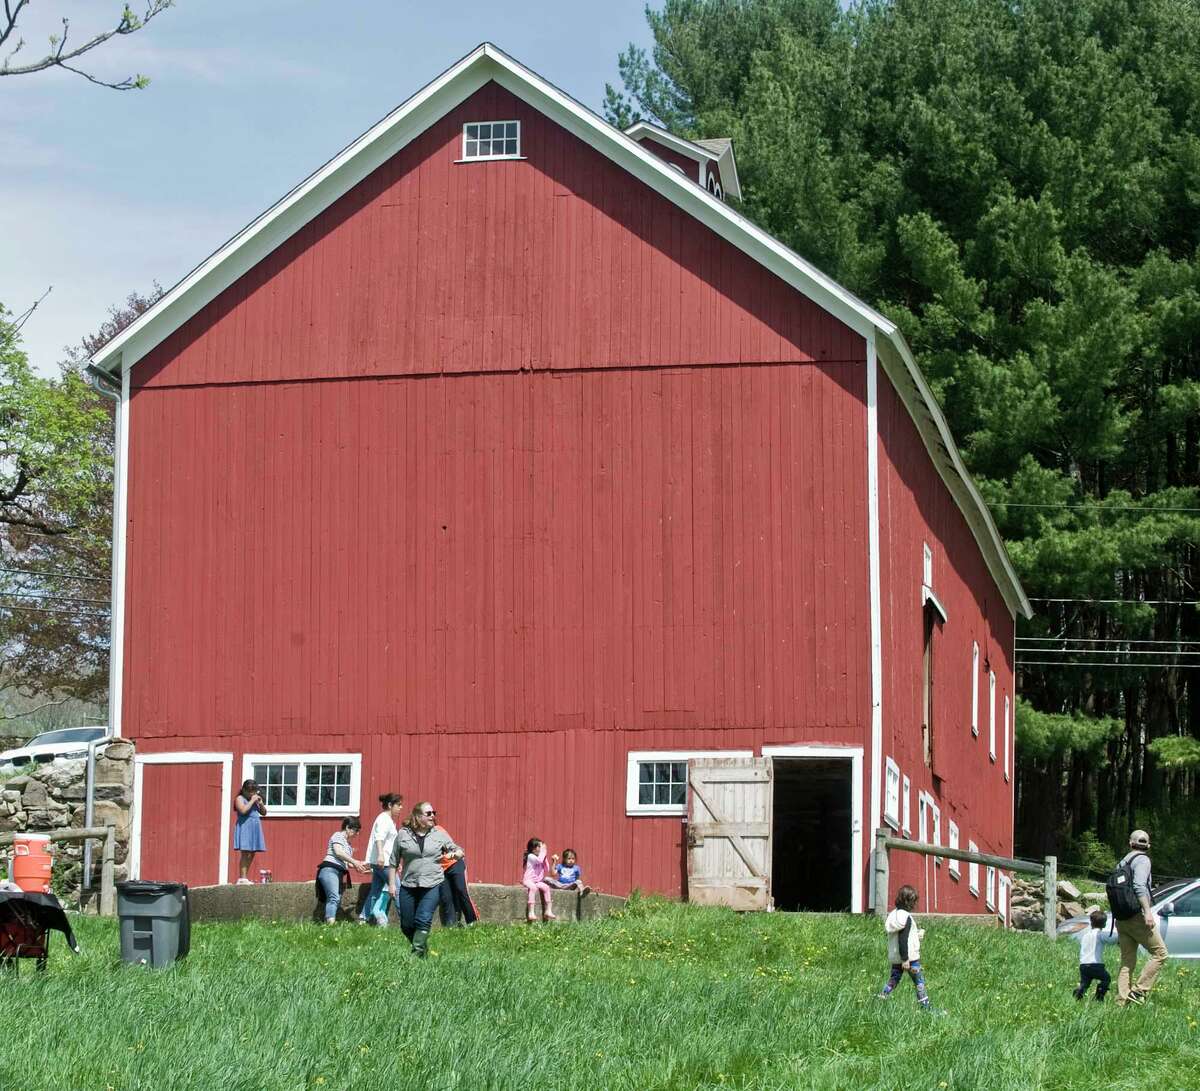 Families tour the barn at Smyrski Farm in New Milford as part of the After School Arts Program in Washington, partnering with Weantinoge Heritage Land Trust. Saturday, May 5, 2018